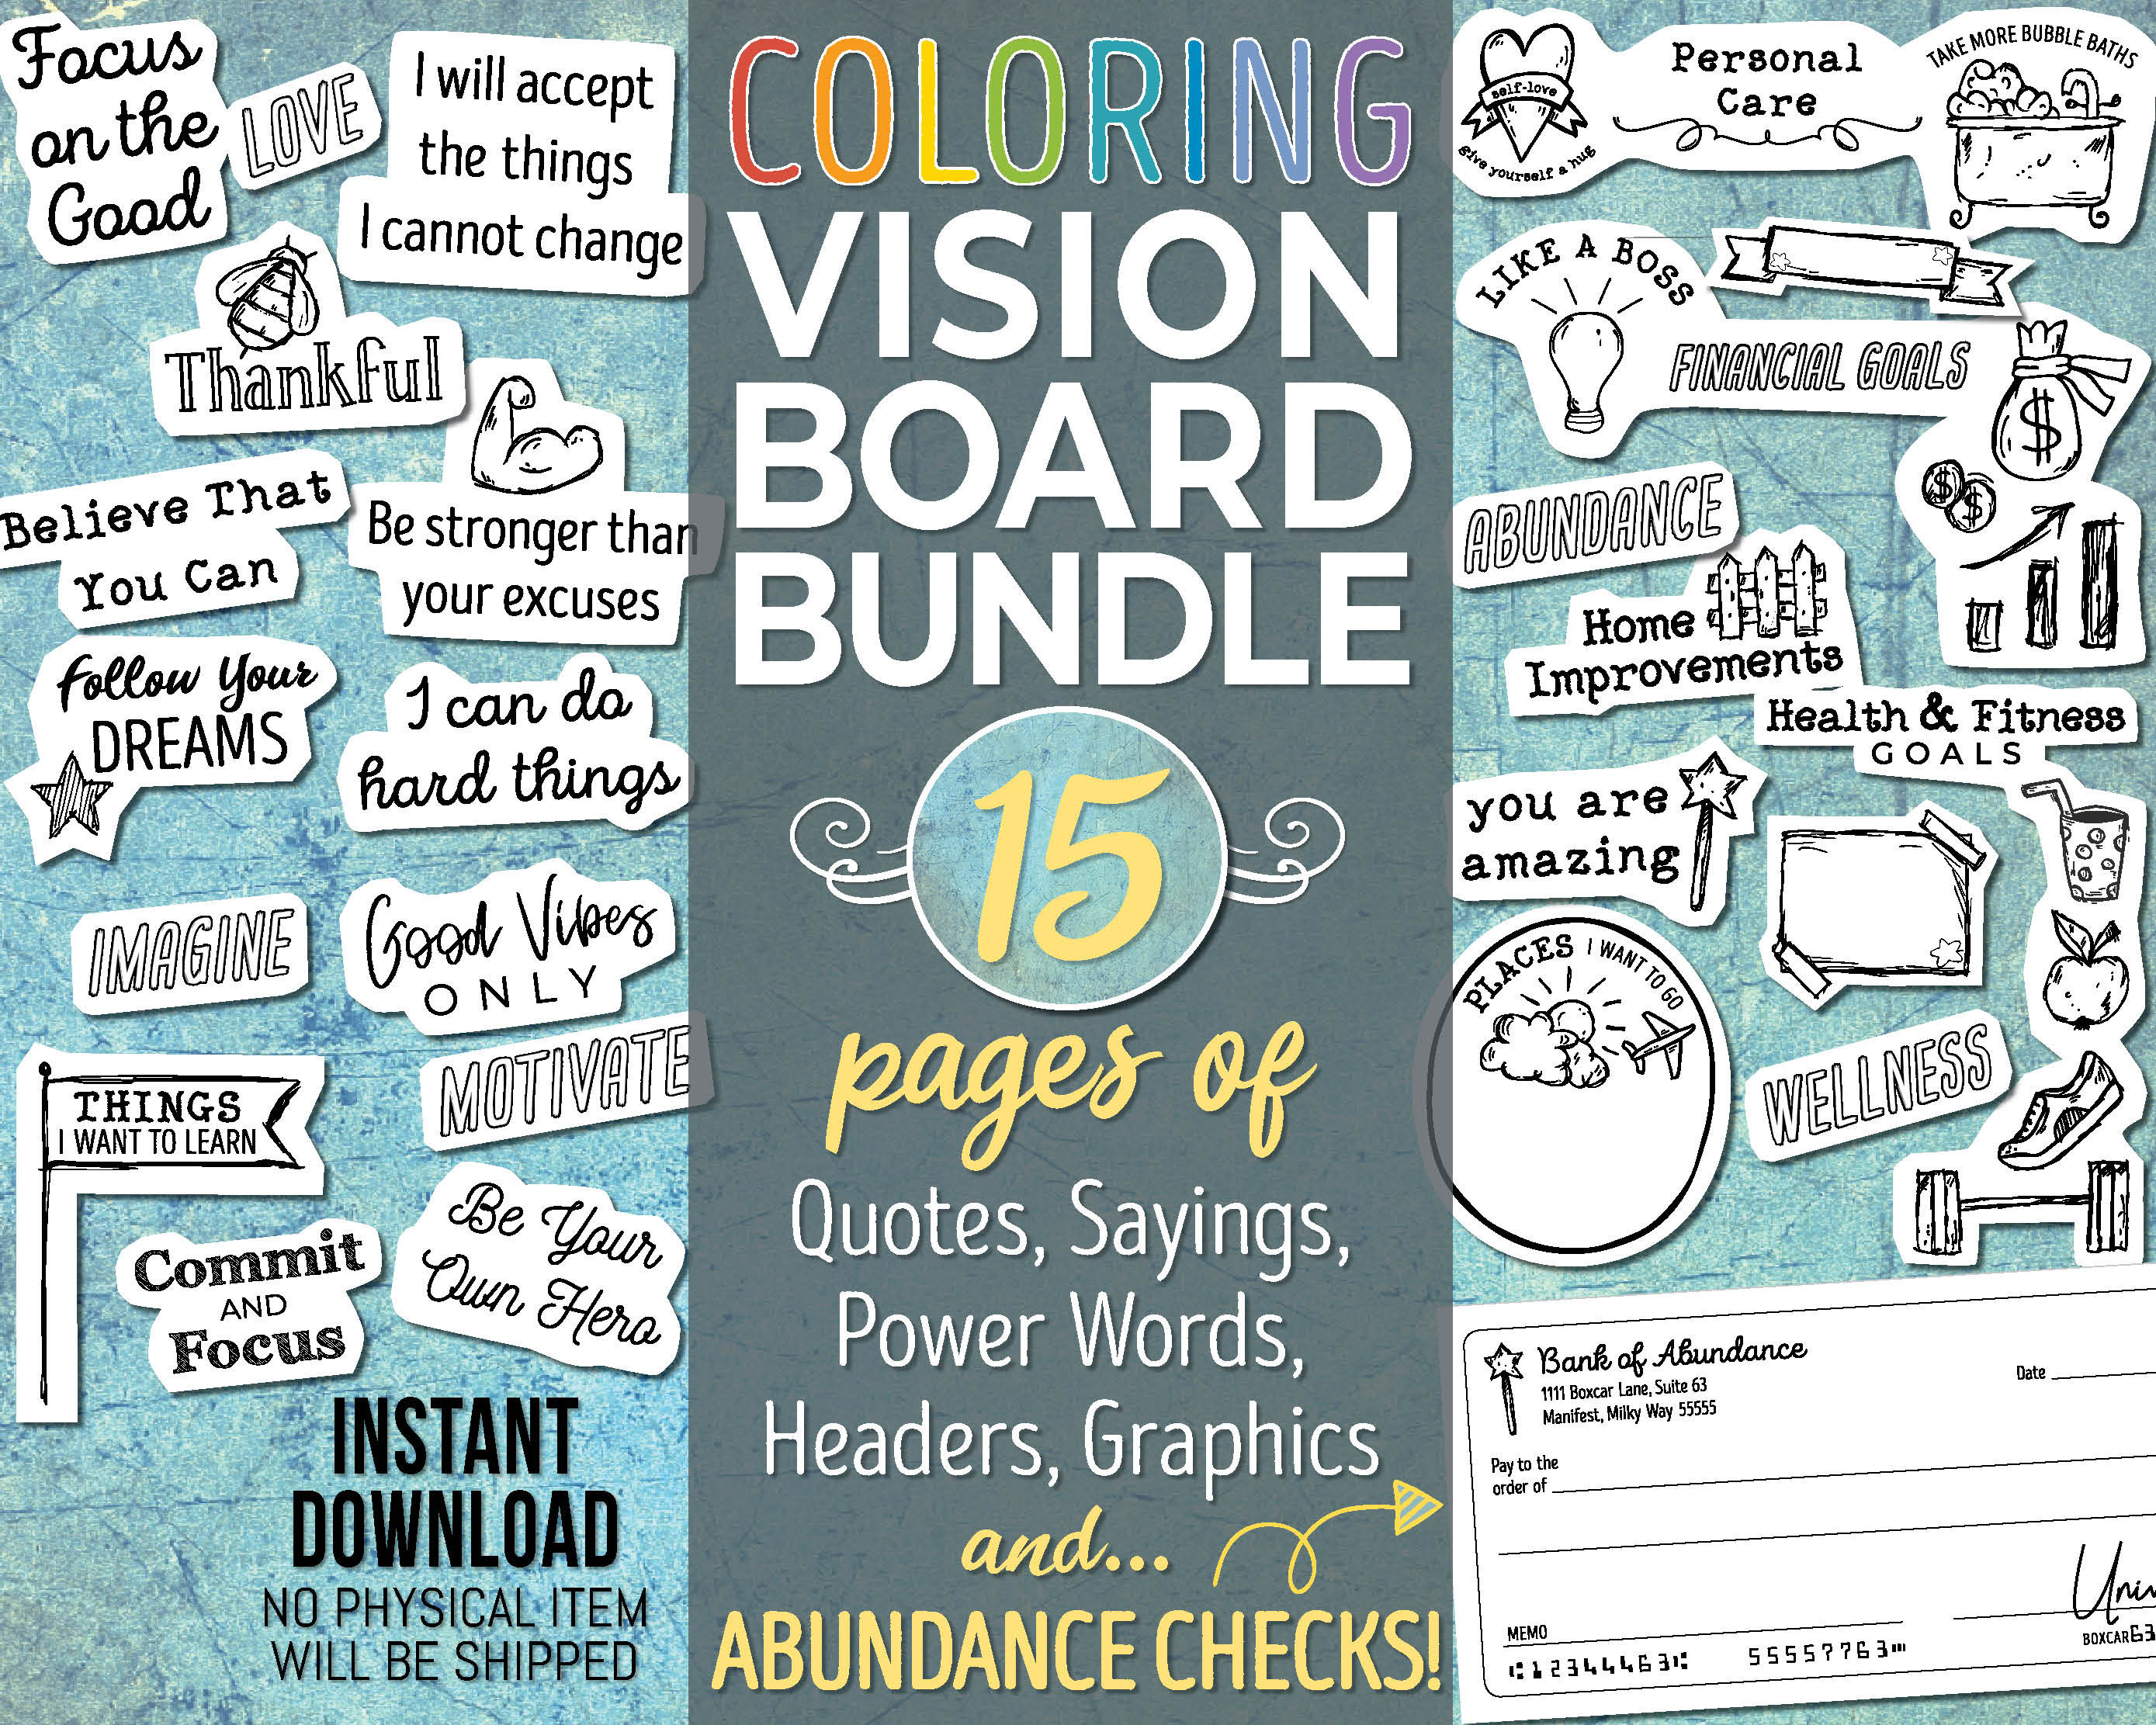 Vision Board Kit - Lot of 100 Pieces - Magazine Clippings - Positivity,  Self-Growth, Manifestation, Attraction 2022 Manifest your Goals